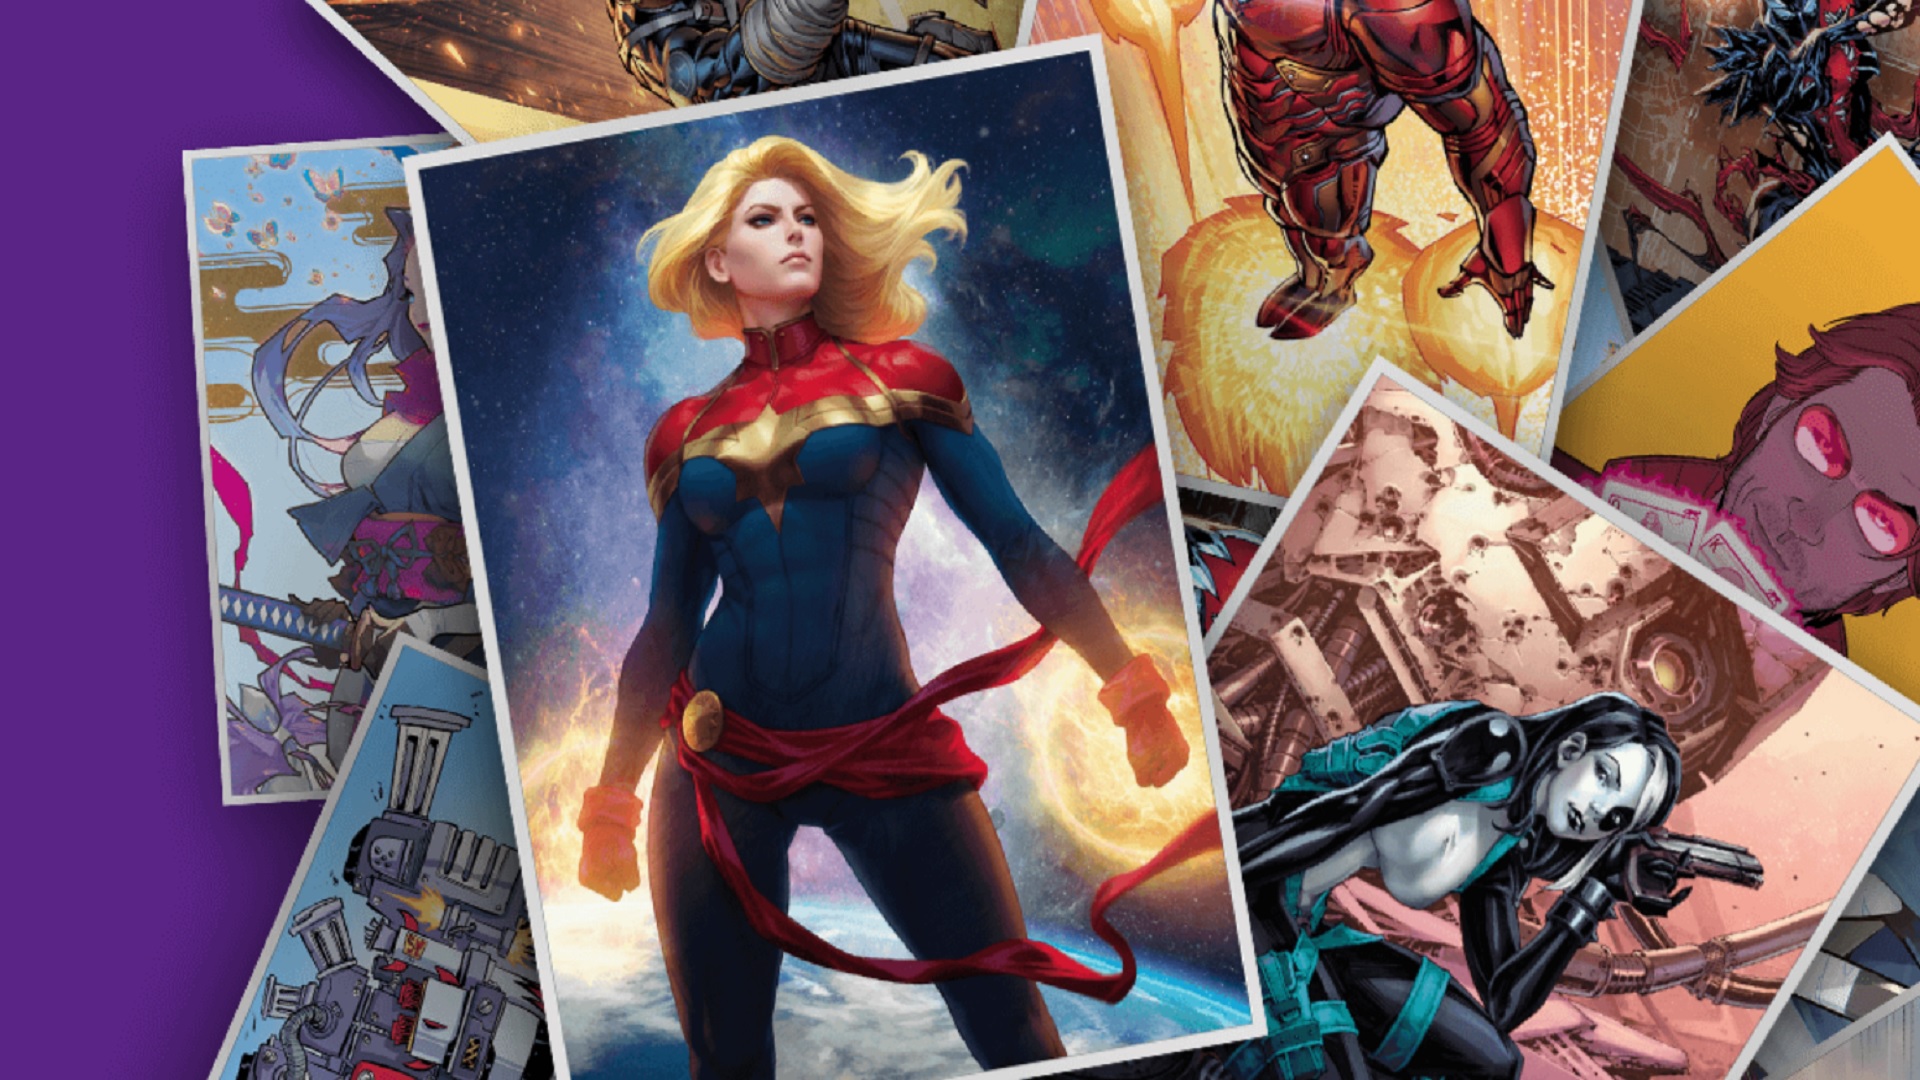 Marvel Snap Zone on X: New upcoming #MarvelSnap Cards in the